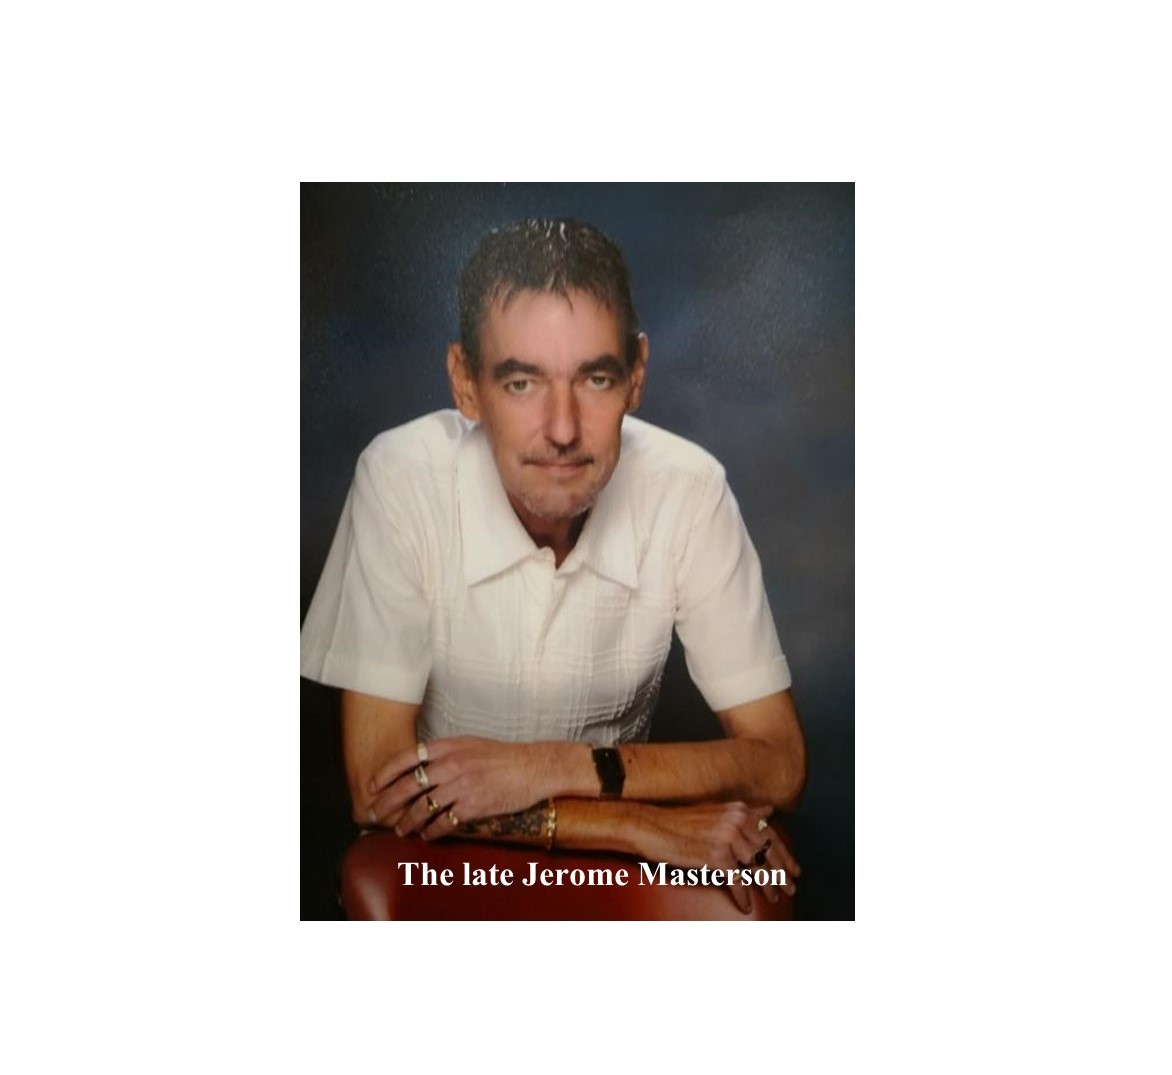 The late Jerome Masterson.